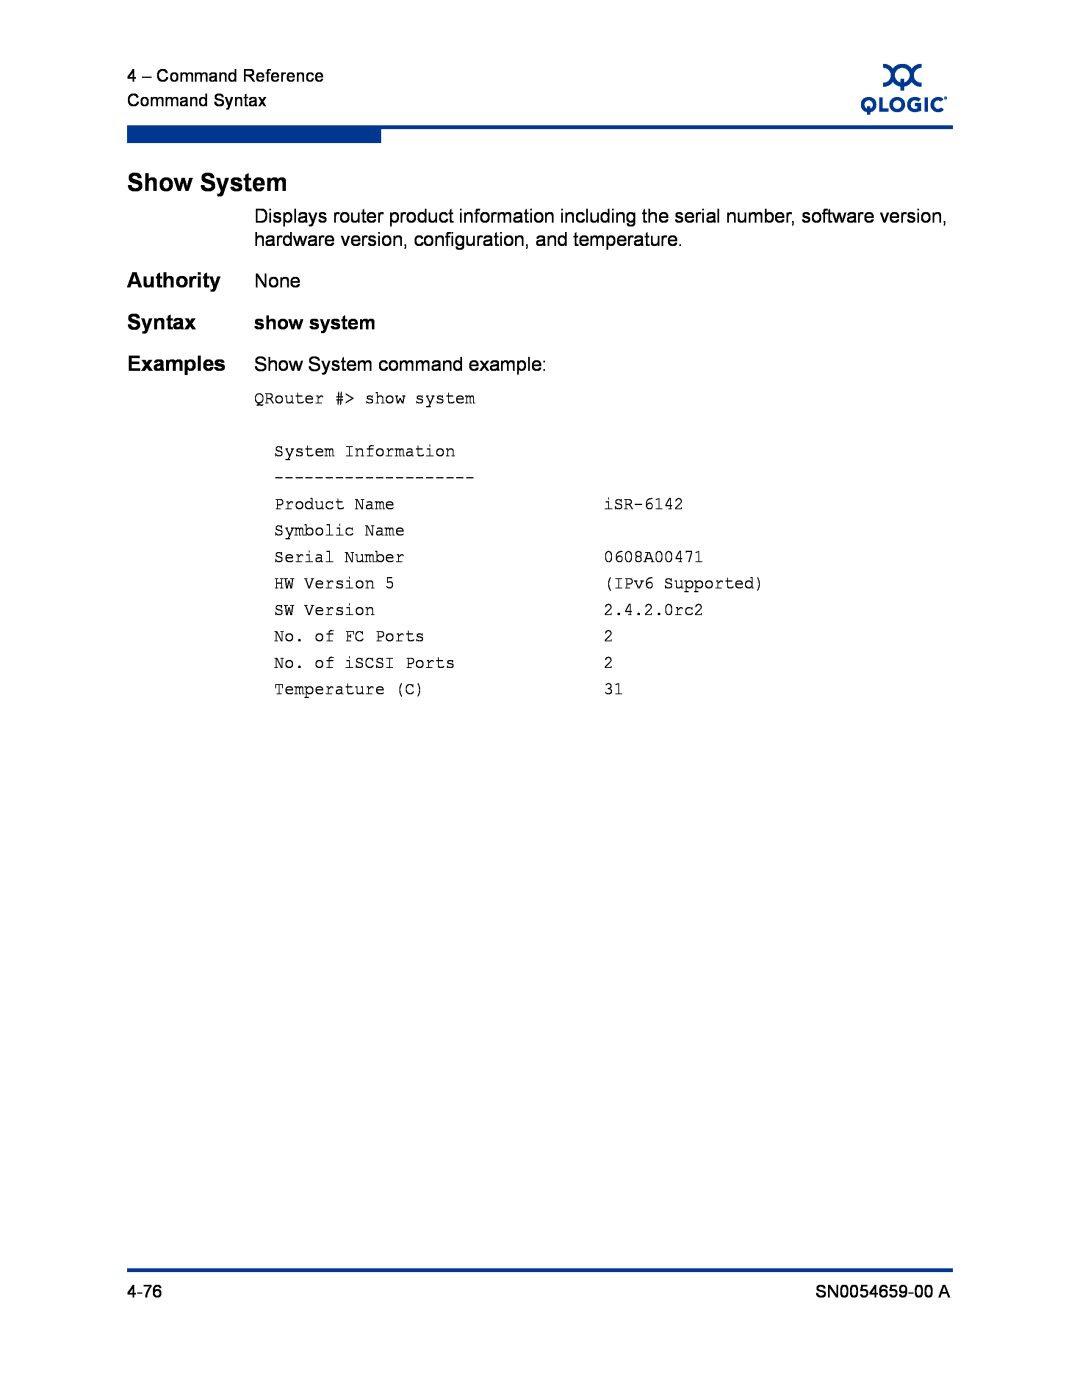 Q-Logic ISR6142 manual Show System, Authority, Syntax, show system 